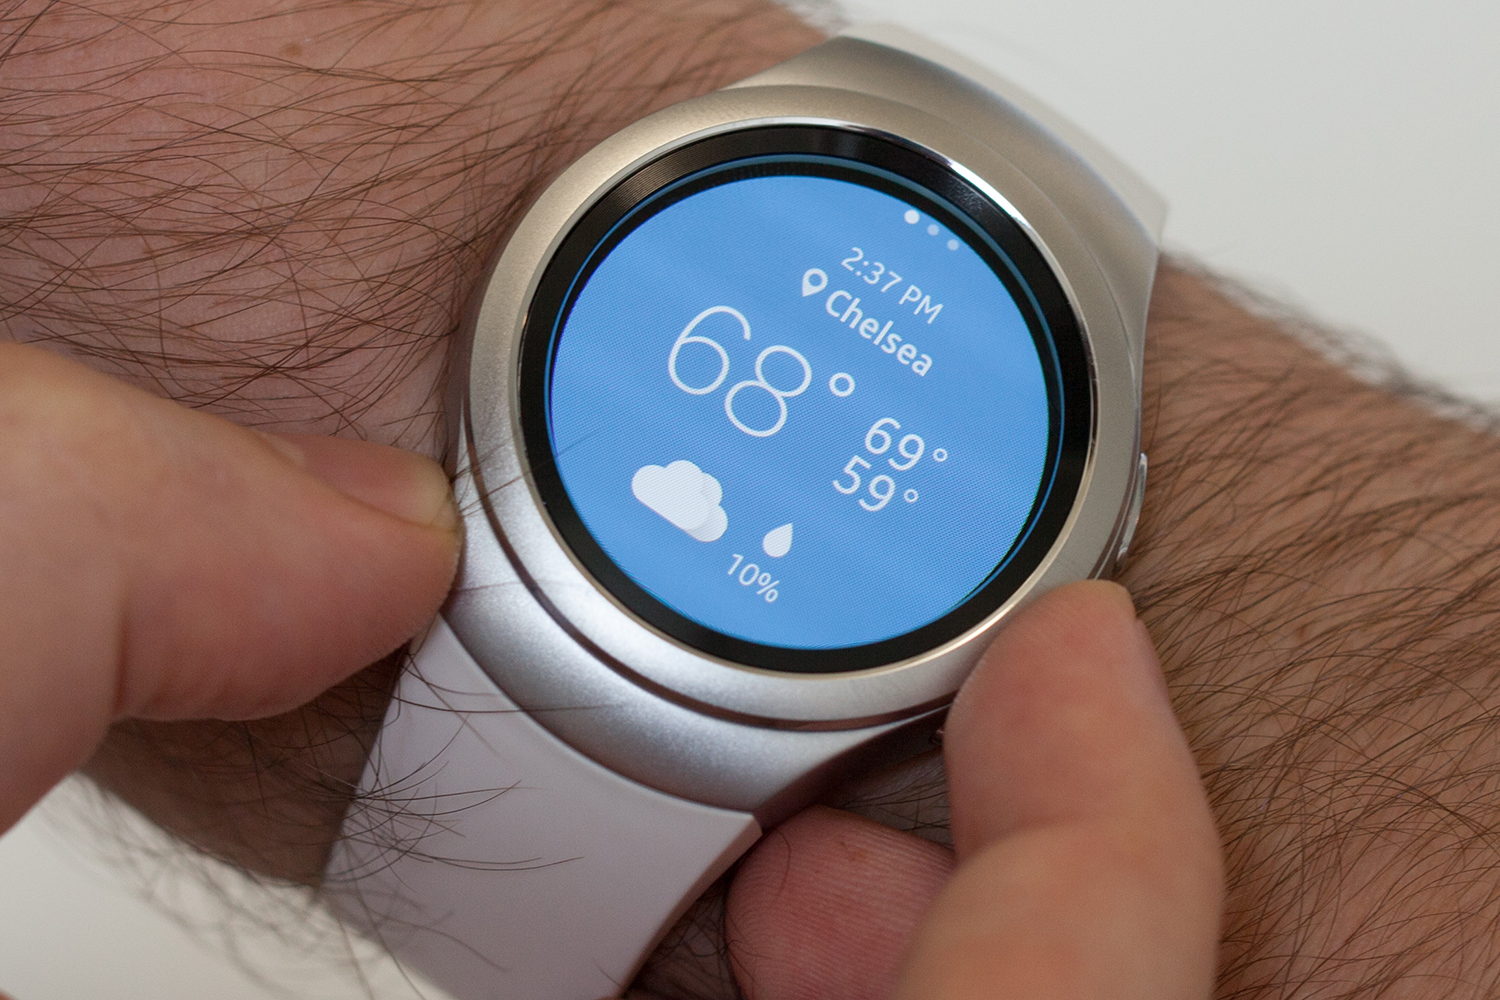 Samsung Pay finally comes to the Gear S2 in a public beta - The Verge